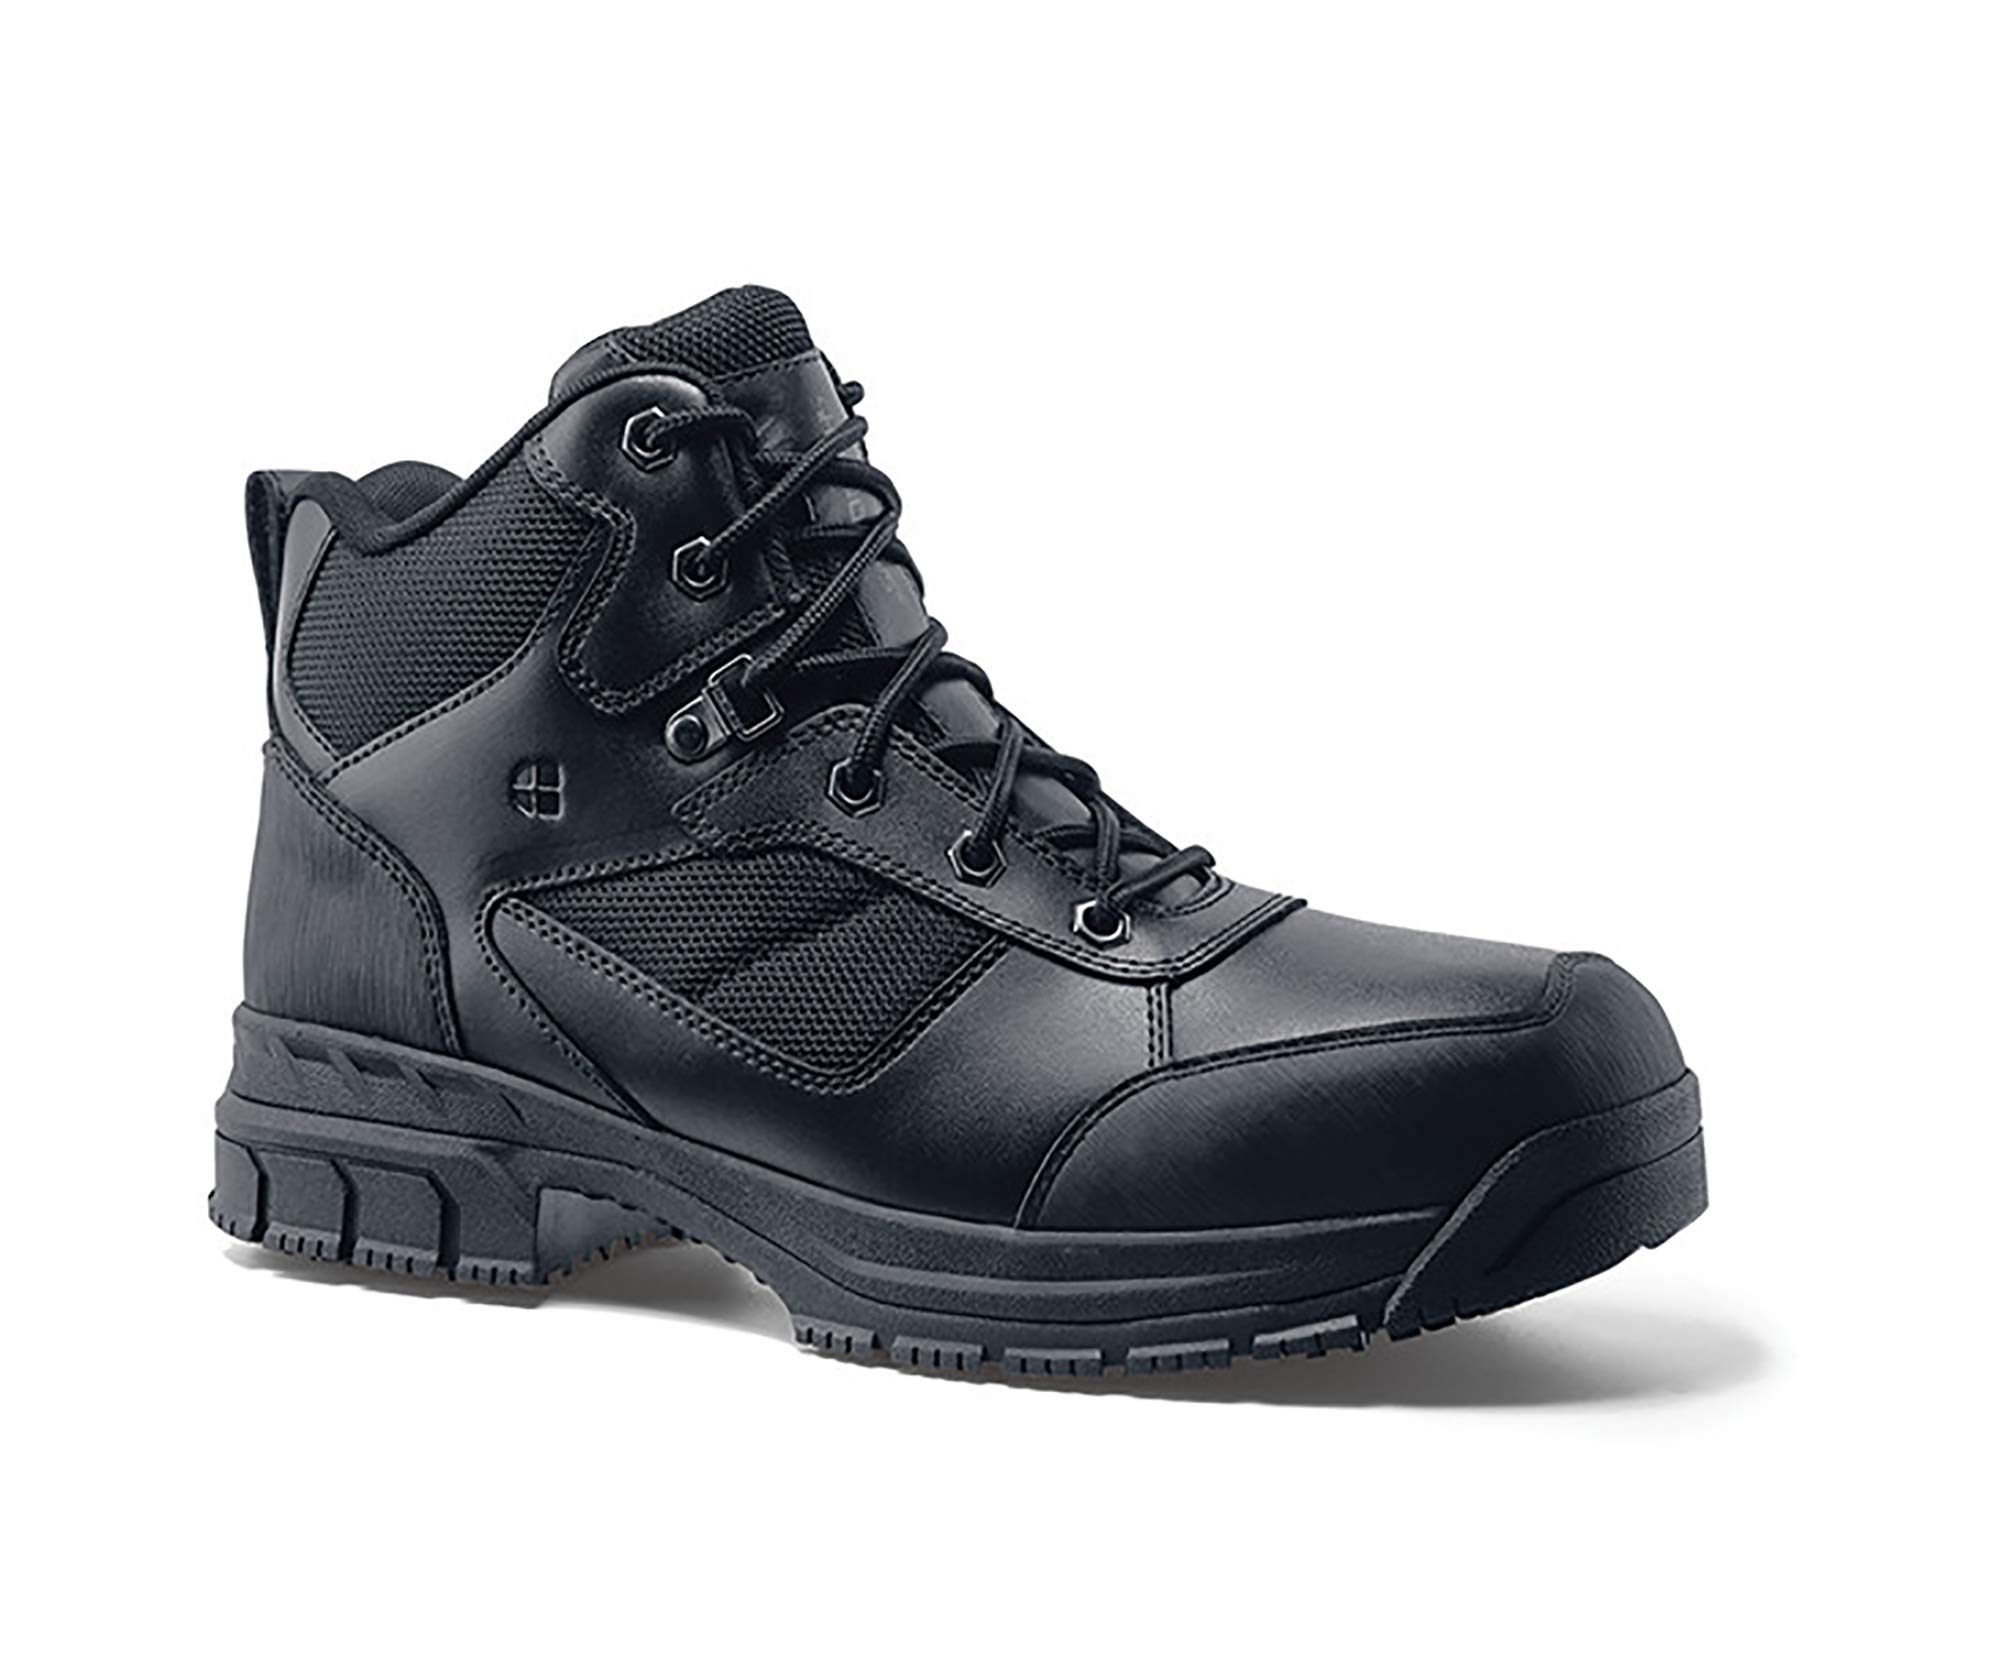 Shoes for Crews Voyager II, Men's, Women's, Unisex Soft Toe and Steel Toe Work Boots, Slip Resistant, Water Resistant, Black